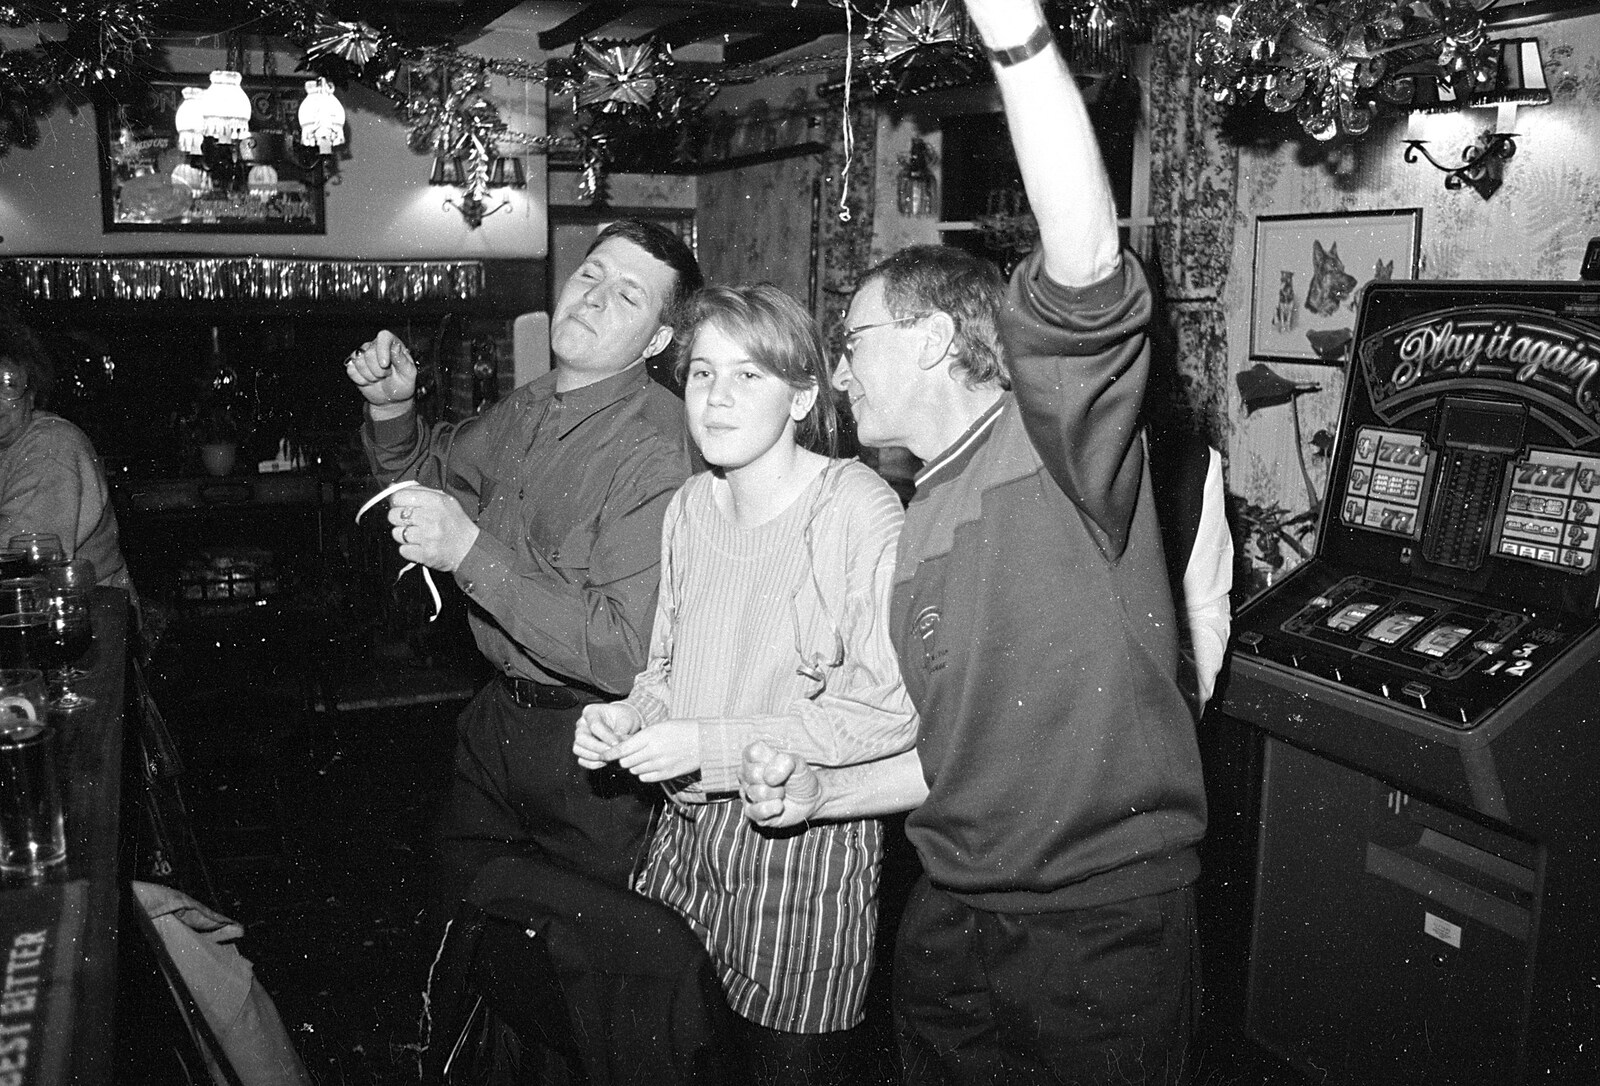 Barry, Lorraine and John Willy from New Year's Eve at the Swan Inn, Brome, Suffolk - 31st December 1992